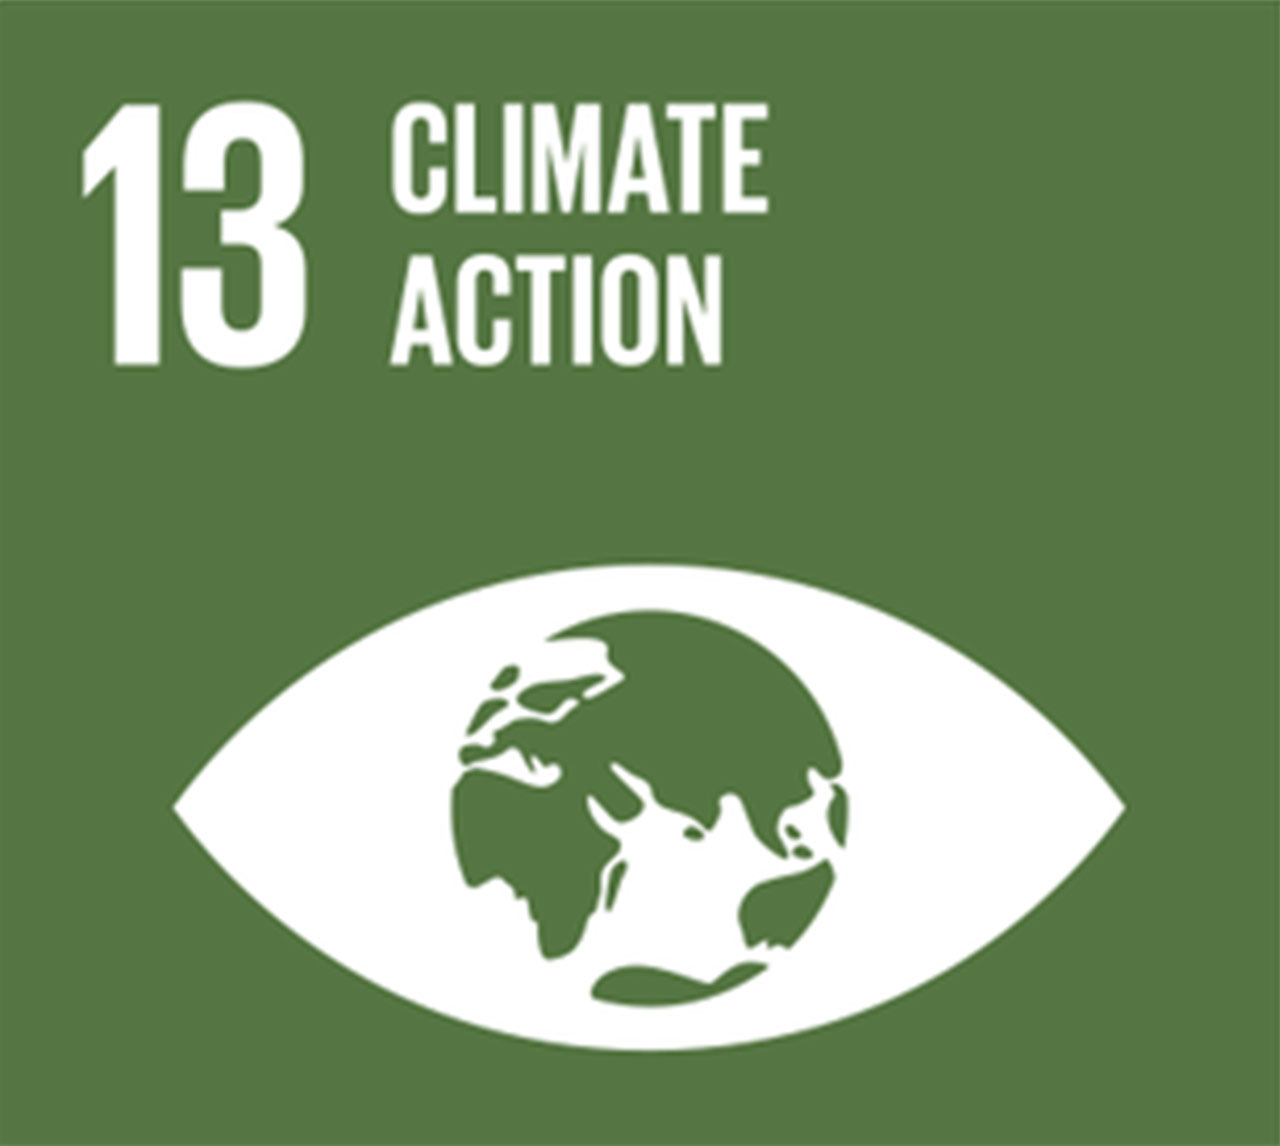 Climate Action - #13.jpg